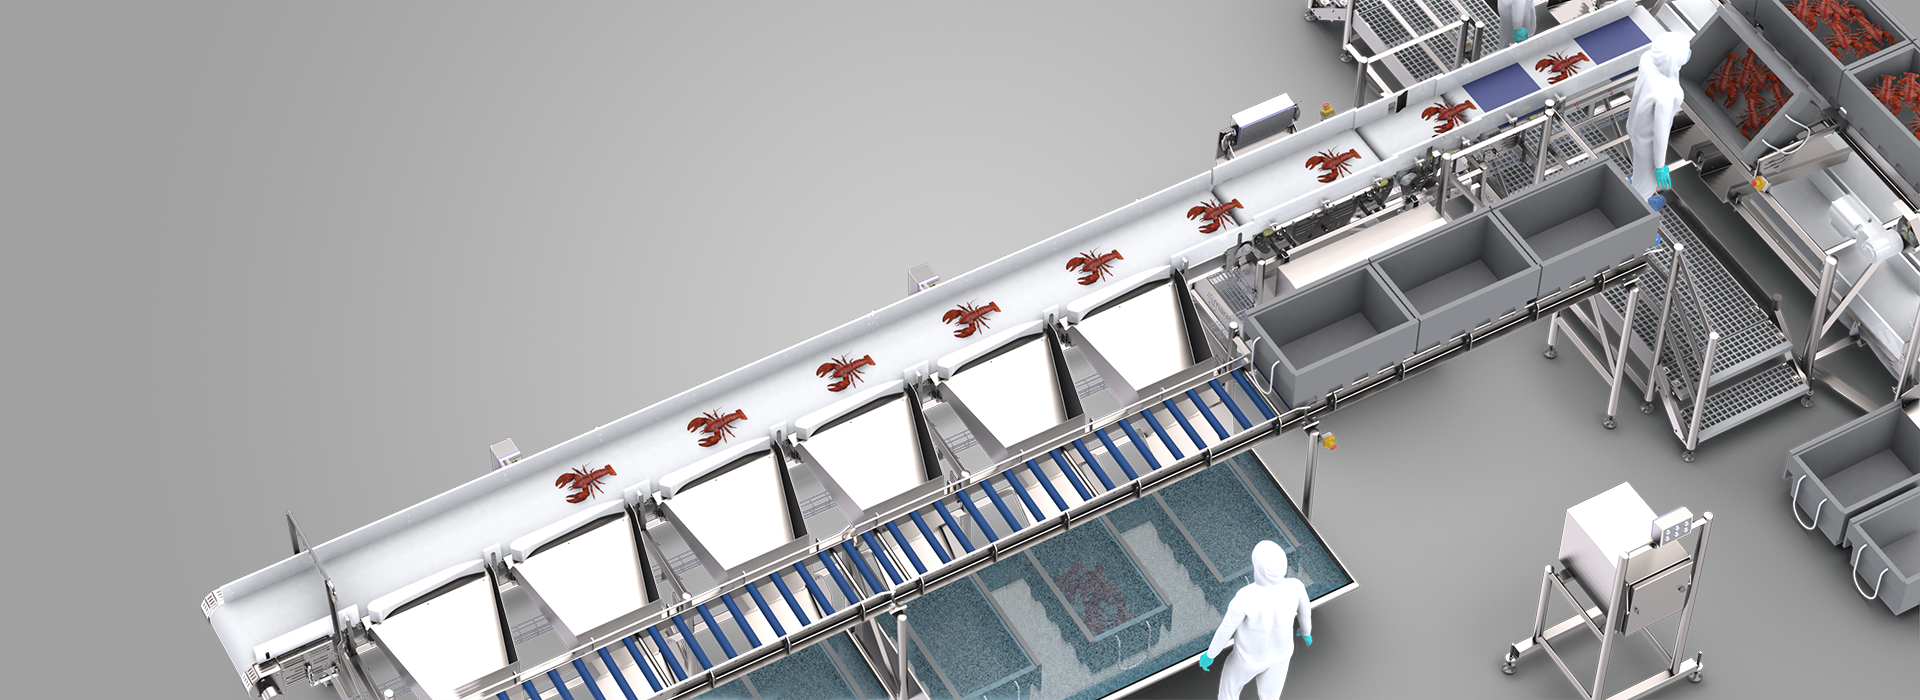 Gentle and accurate weighing and grading of fragile products such as crabs, langoustines and crabs, even at high speed.